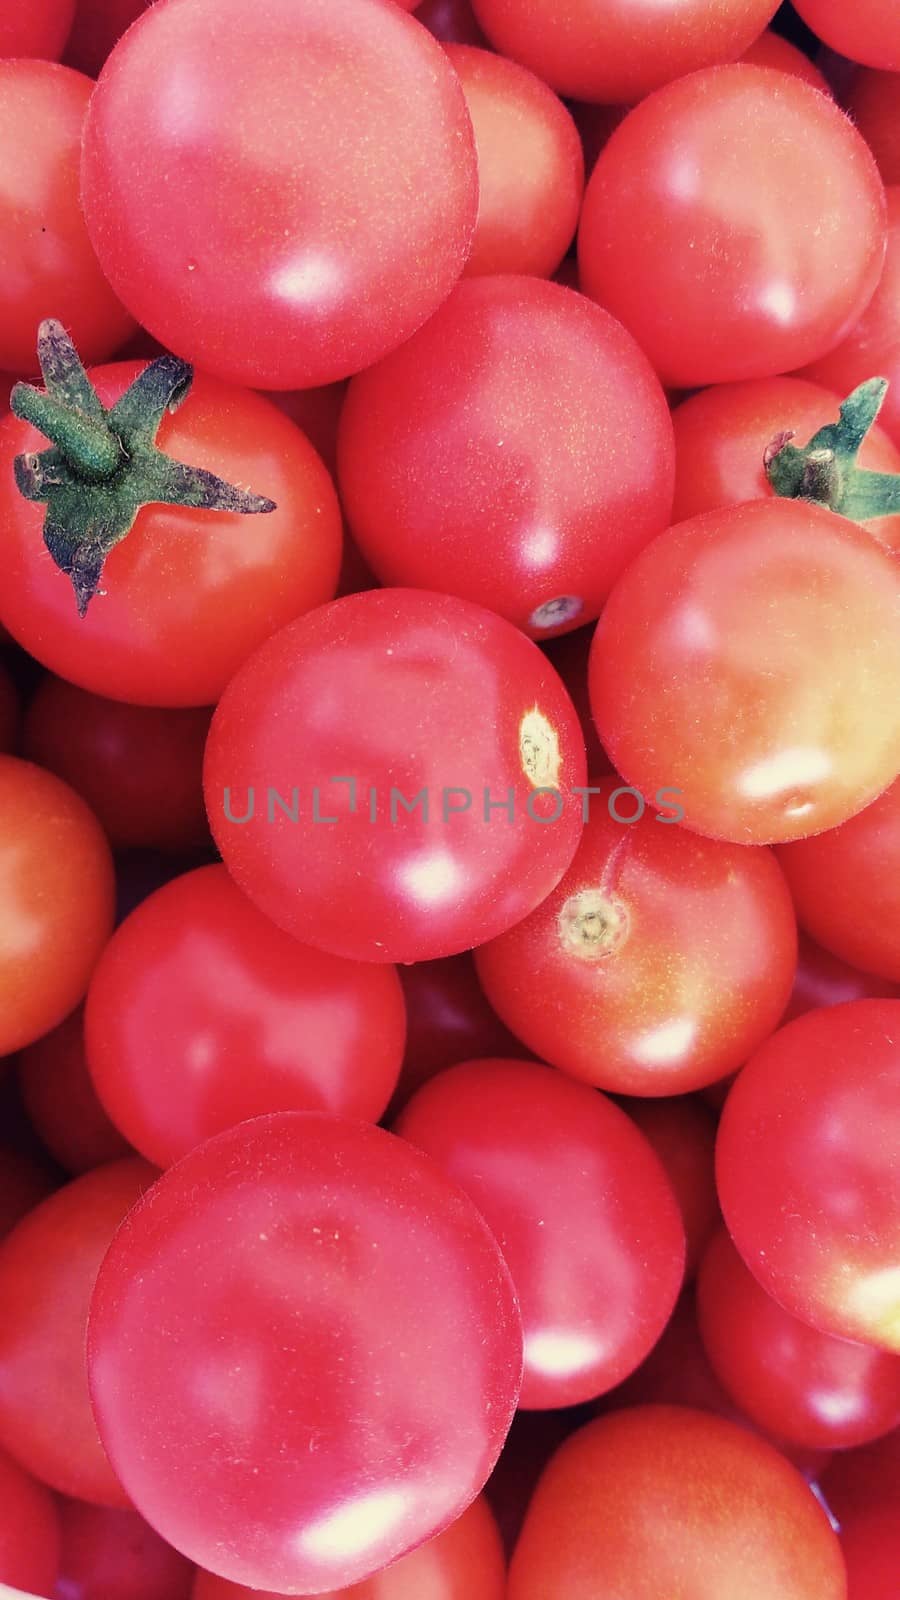 Red tomatoes background by soniabonet